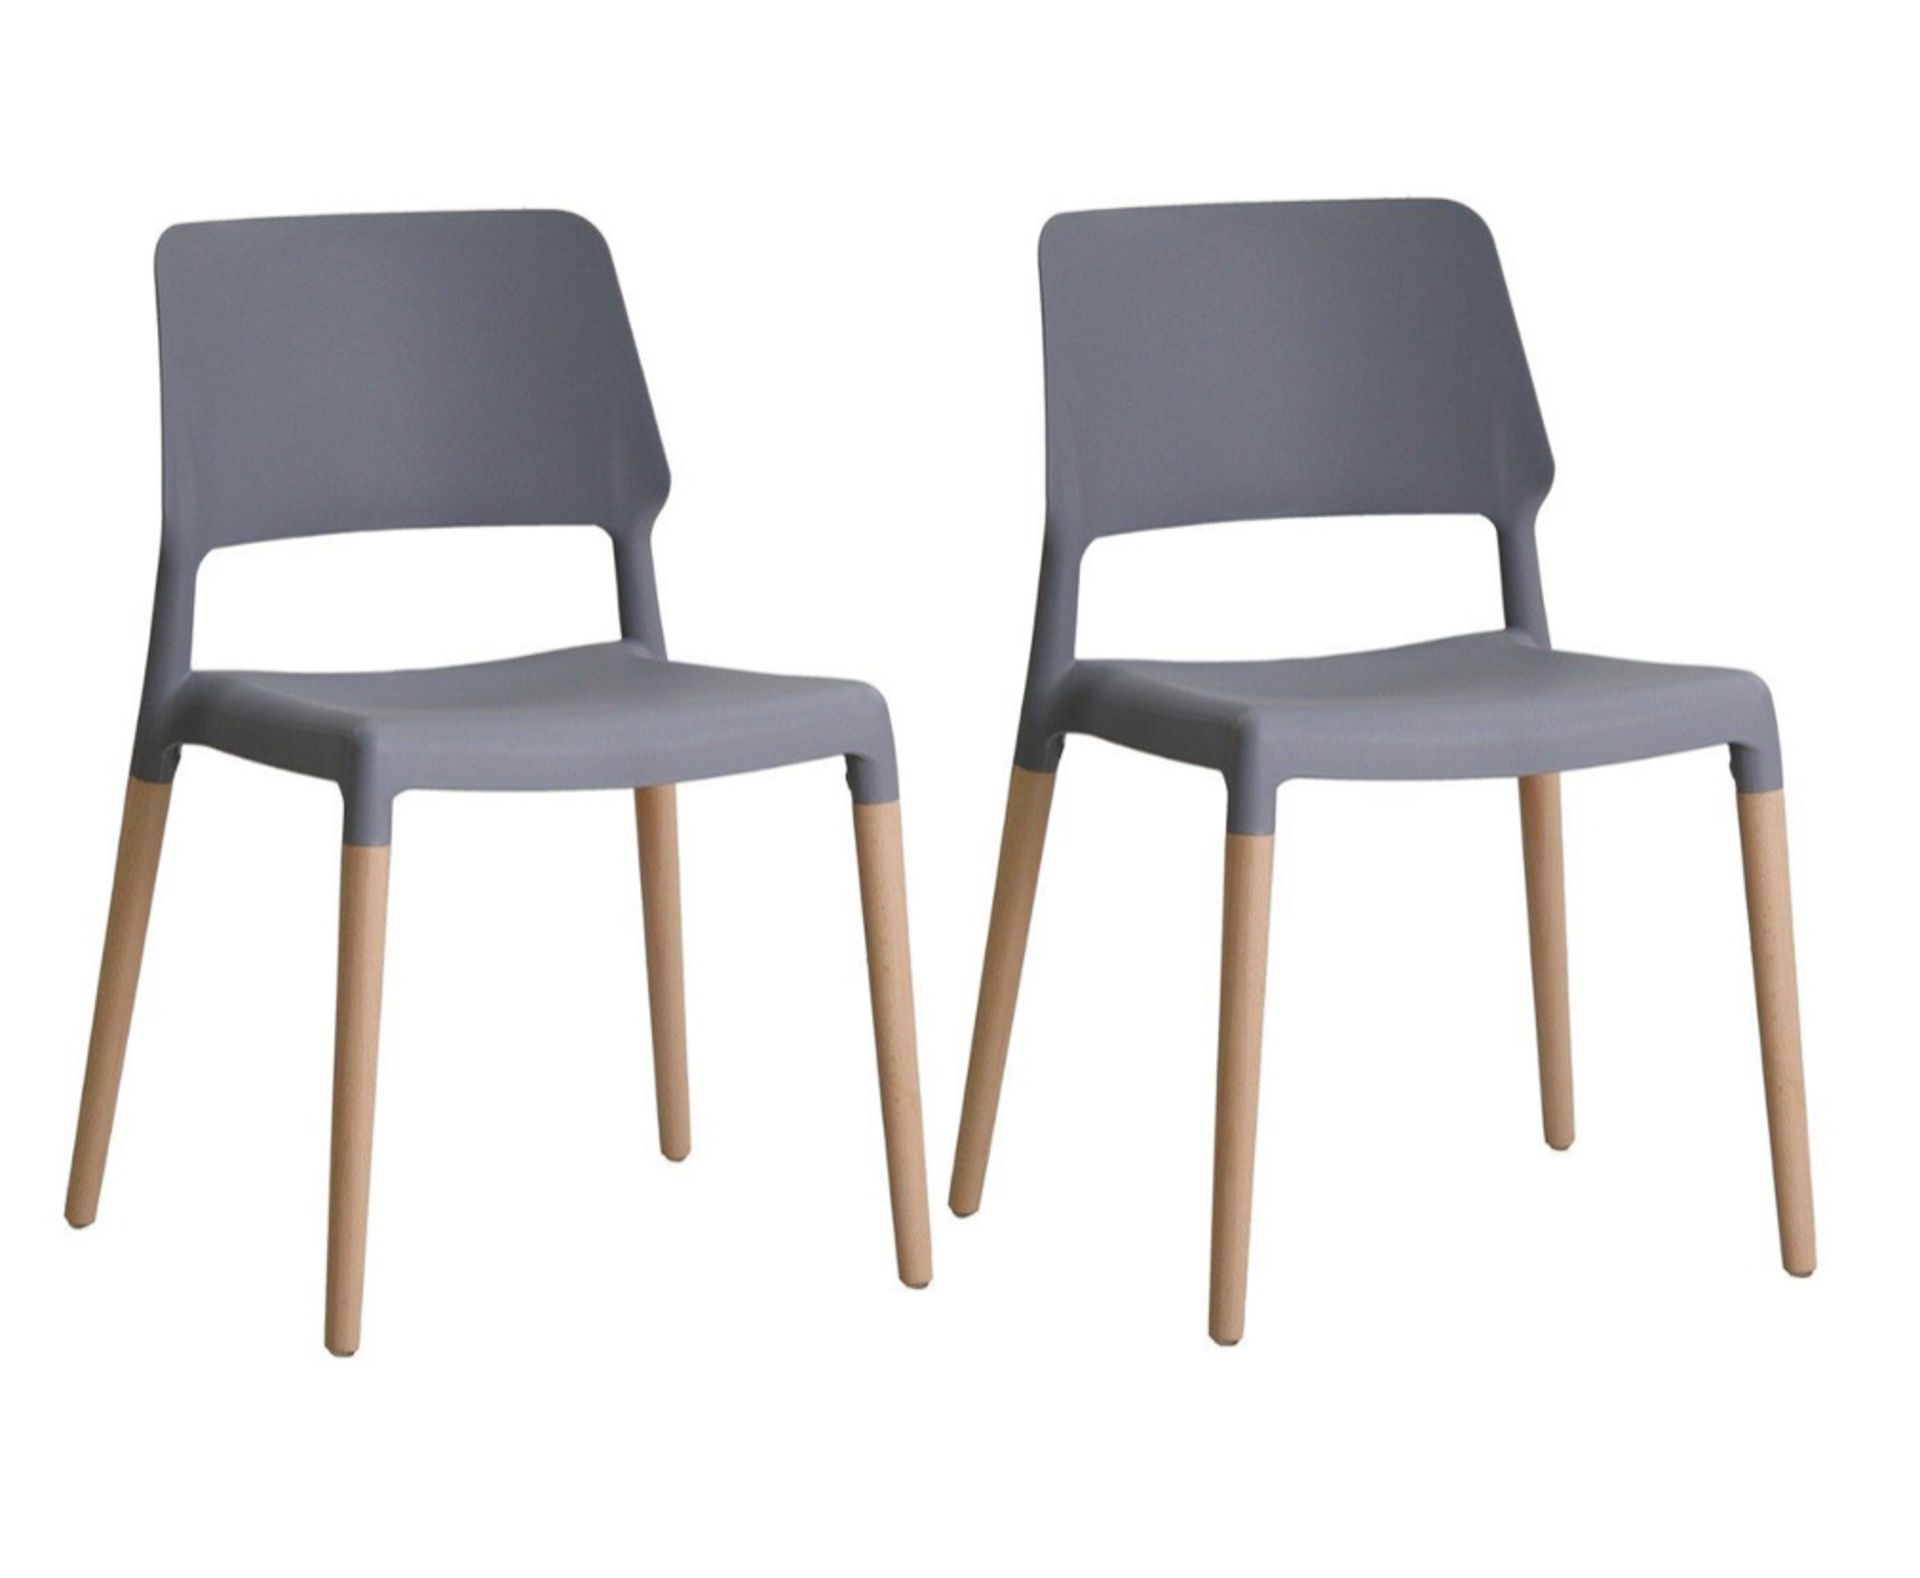 A1 PRODUCT NEW -   RIVA PAIR OF DINING CHAIRS IN GREY DURABLE PLASTIC - RRP Â£159 PER PAIR - Image 3 of 3